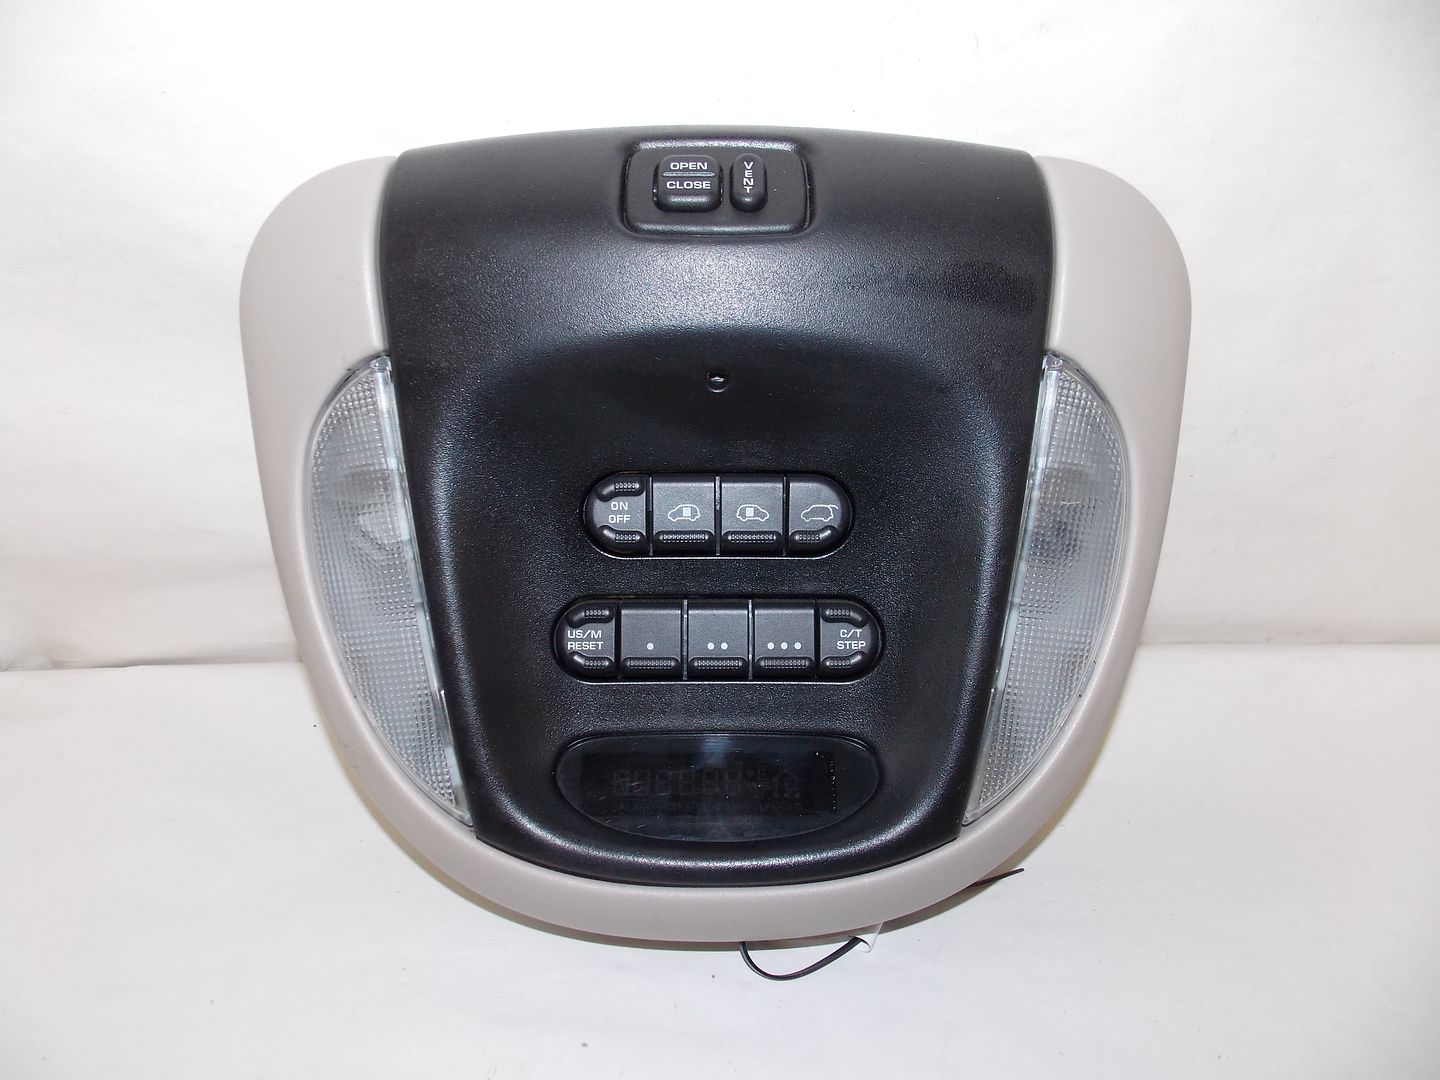 01-07 Town & Country Overhead Console 2001 2002 2003 2004 2005 2006 2007 #1138 | eBay 2003 Chrysler Town And Country Center Console